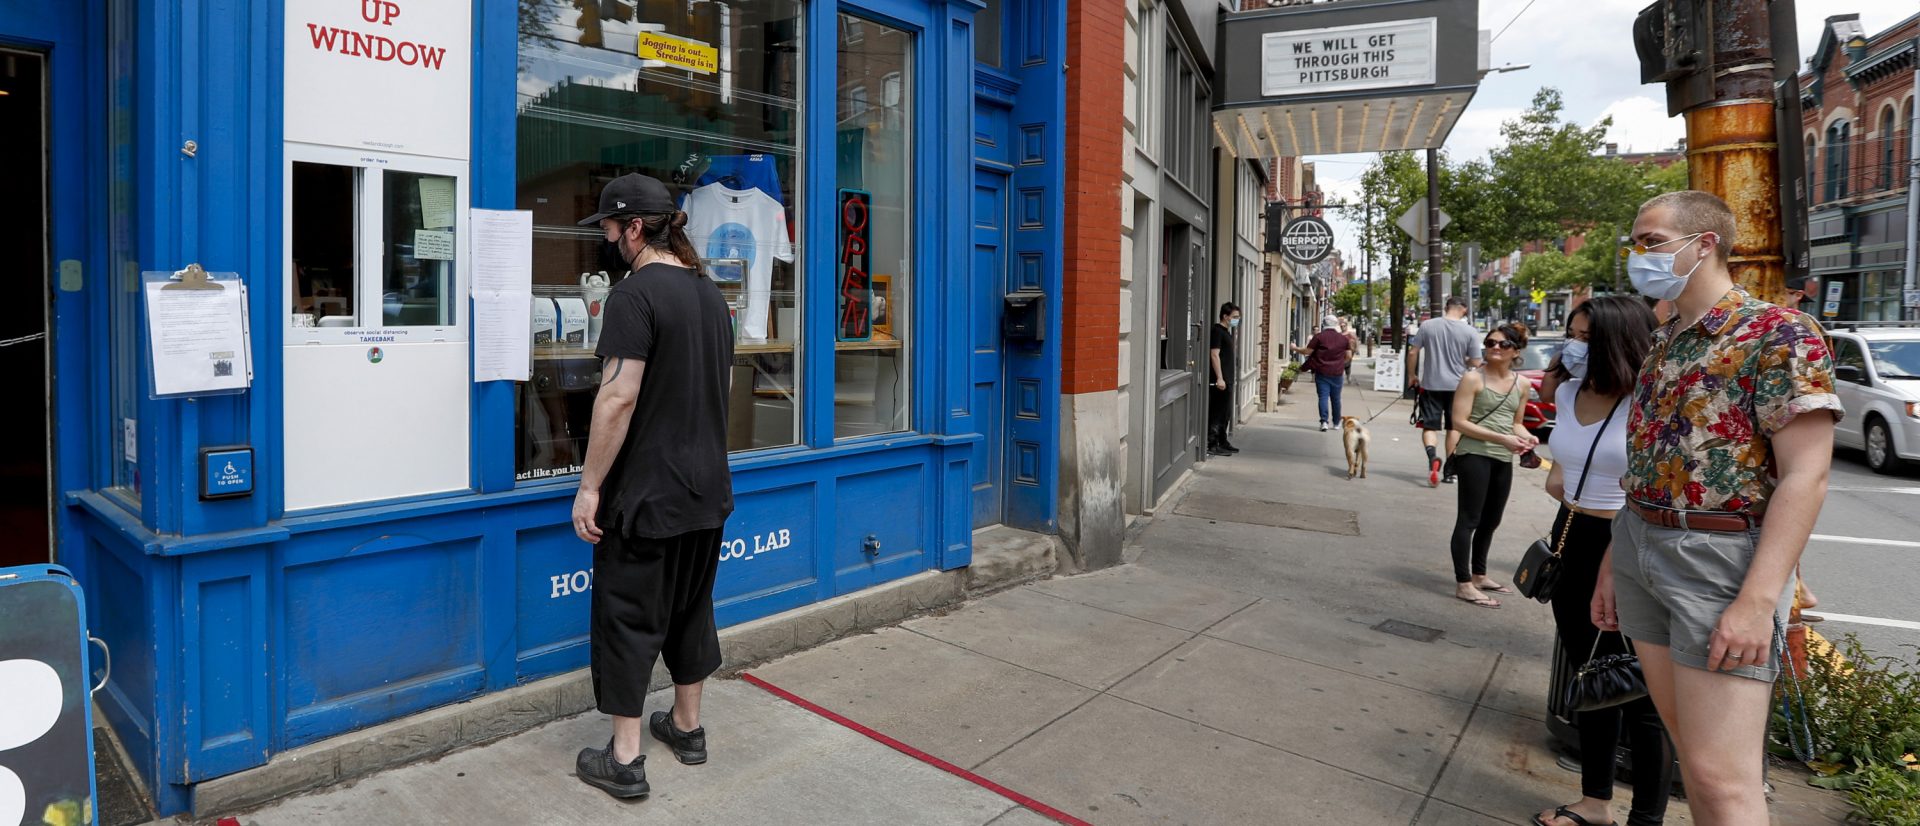 People wait for a take-out order at a restaurant along Butler Street in Pittsburgh's Lawrenceville neighborhood as counties in southwestern Pennsylvania join northwestern and the north central regions with more relaxed COVID-19 prevention restrictions, Friday, May 15, 2020, in Pittsburgh.